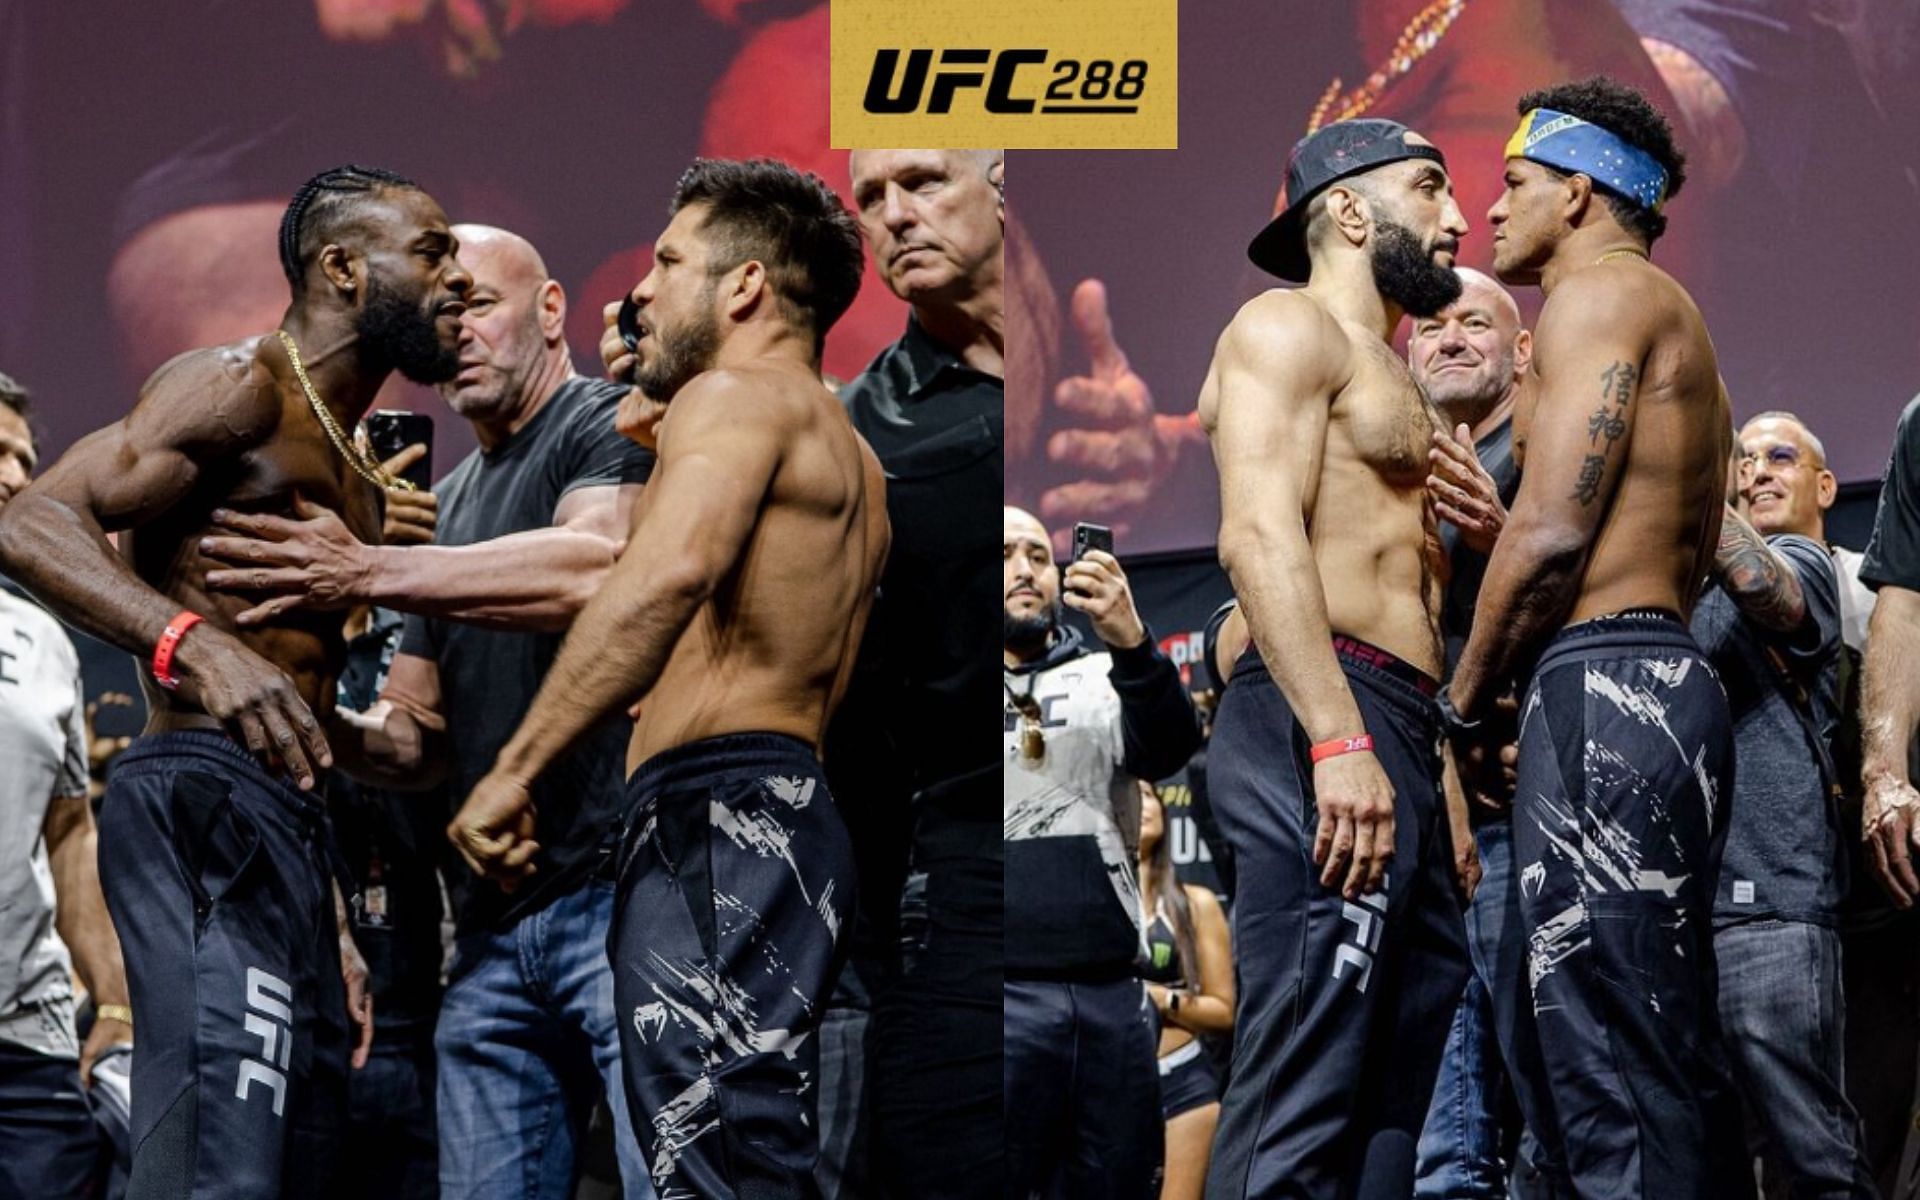 UFC schedule: UFC 288 fight times and where to watch it